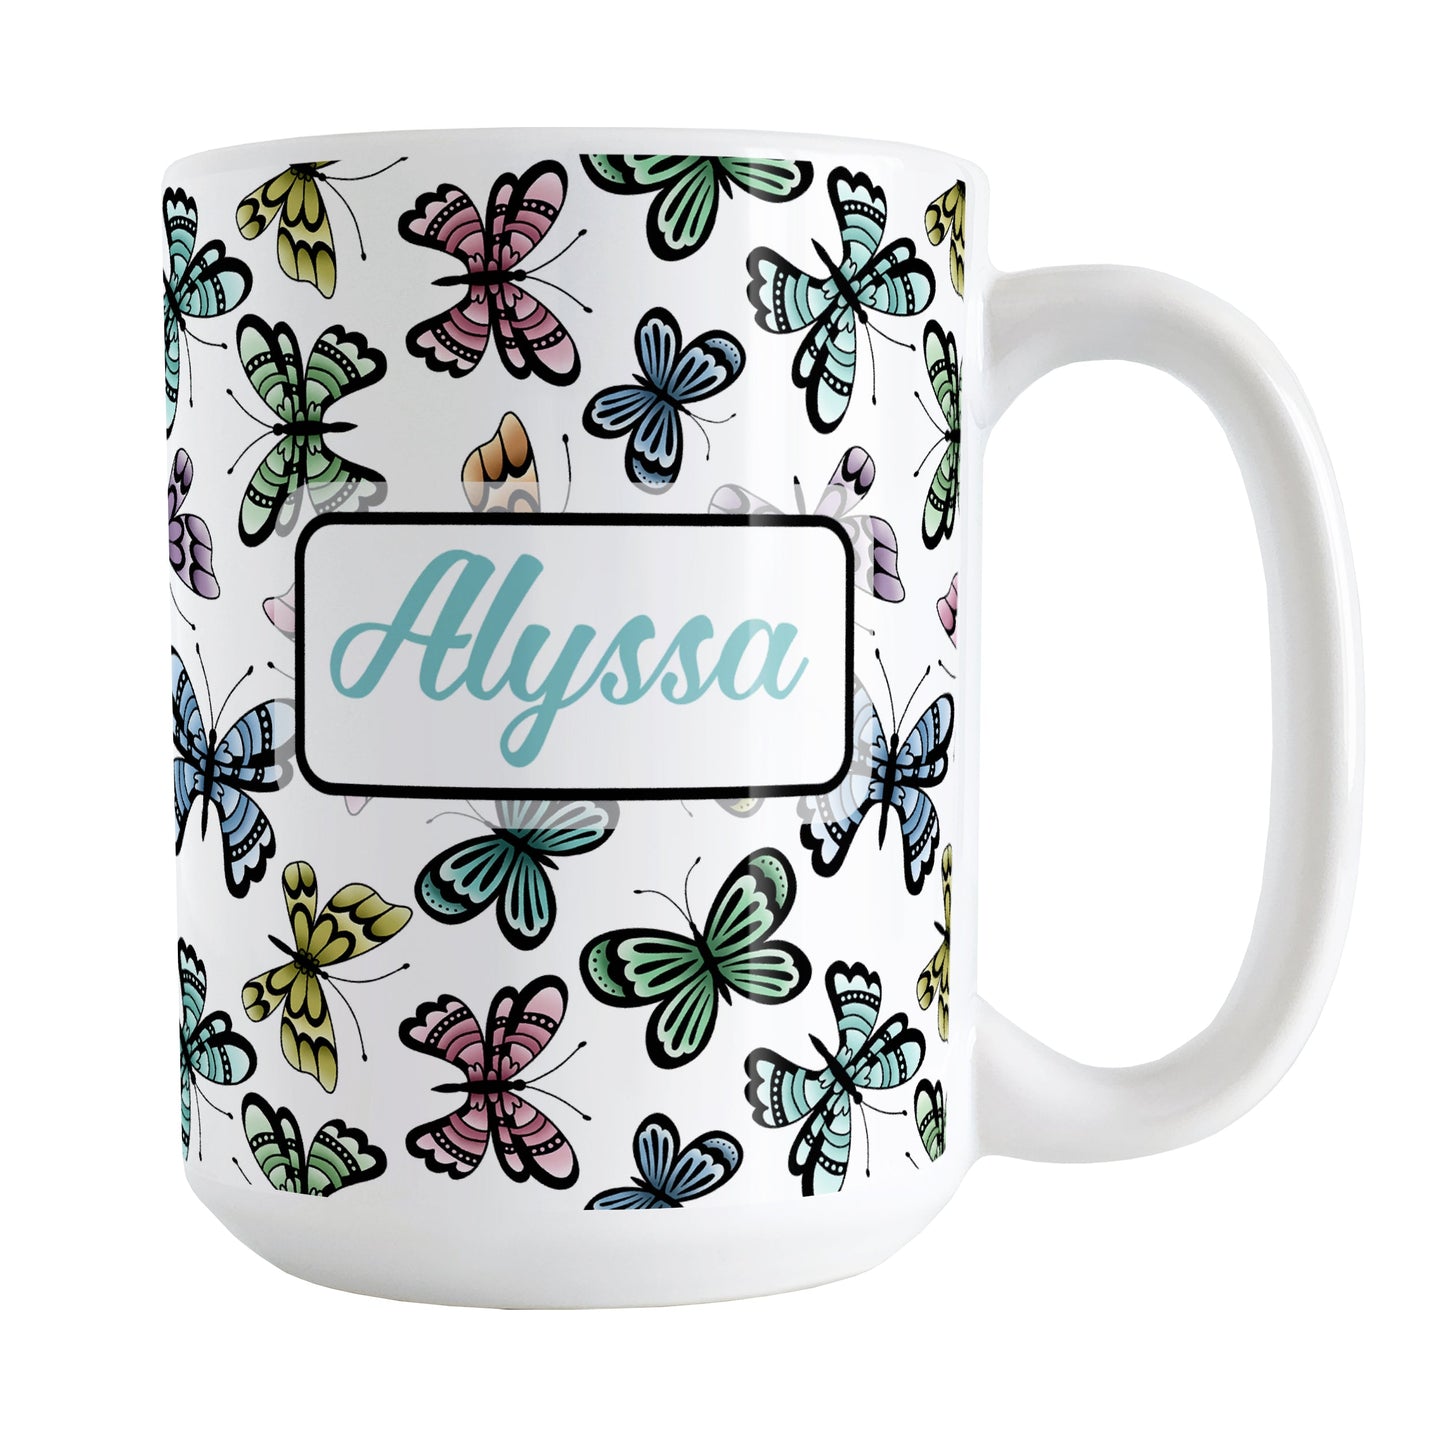 Personalized Pretty Butterfly Pattern Mug (15oz) at Amy's Coffee Mugs. A ceramic coffee mug designed with pretty and colorful butterflies in a pattern that wraps around the mug to the handle. Your name is personalized in turquoise on both sides of the mug. 